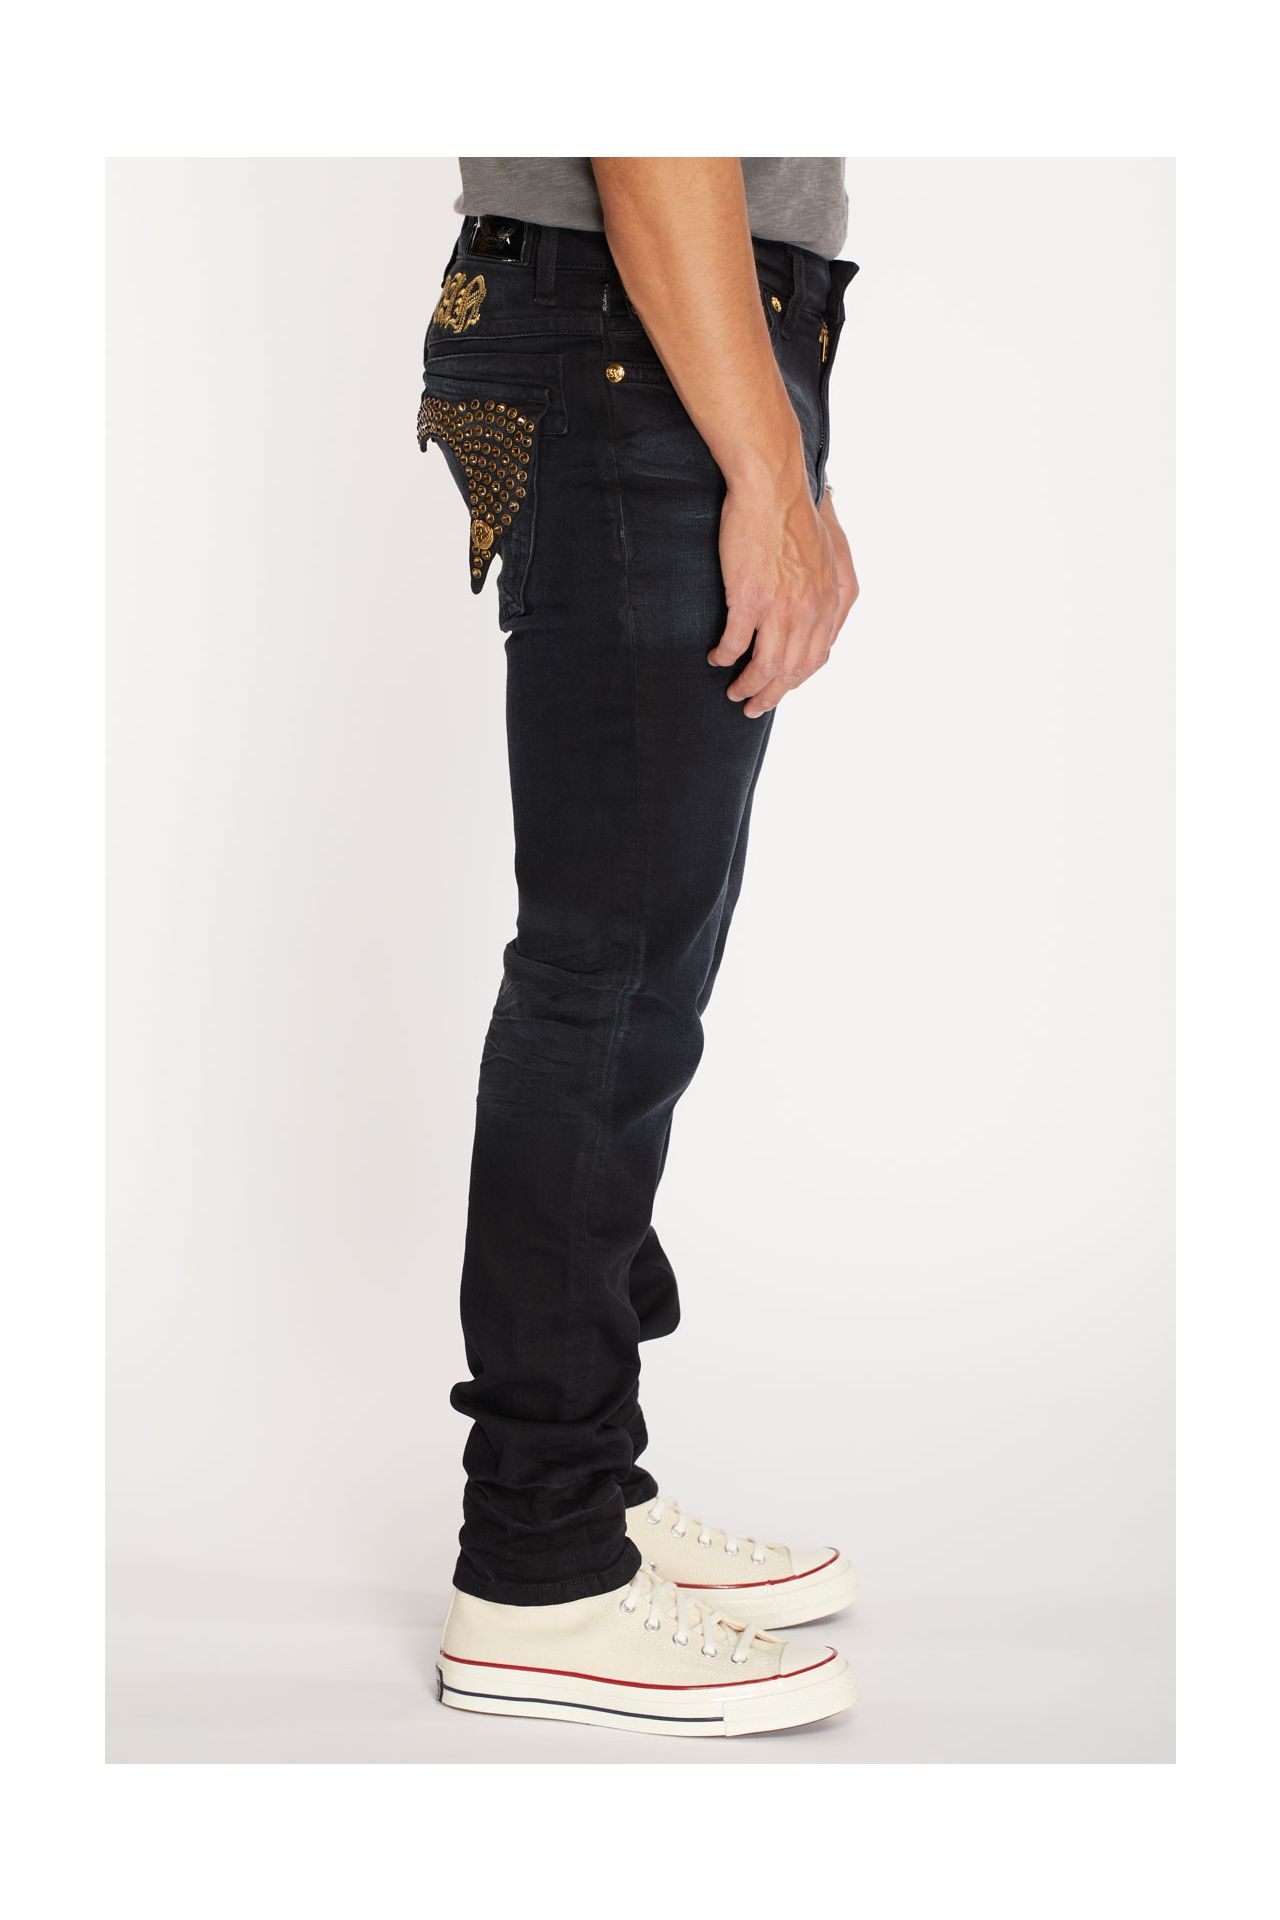 KILLER FLAP SKINNY MENS JEANS IN F_UP BLACK WITH FULL GOLD CRYSTALS